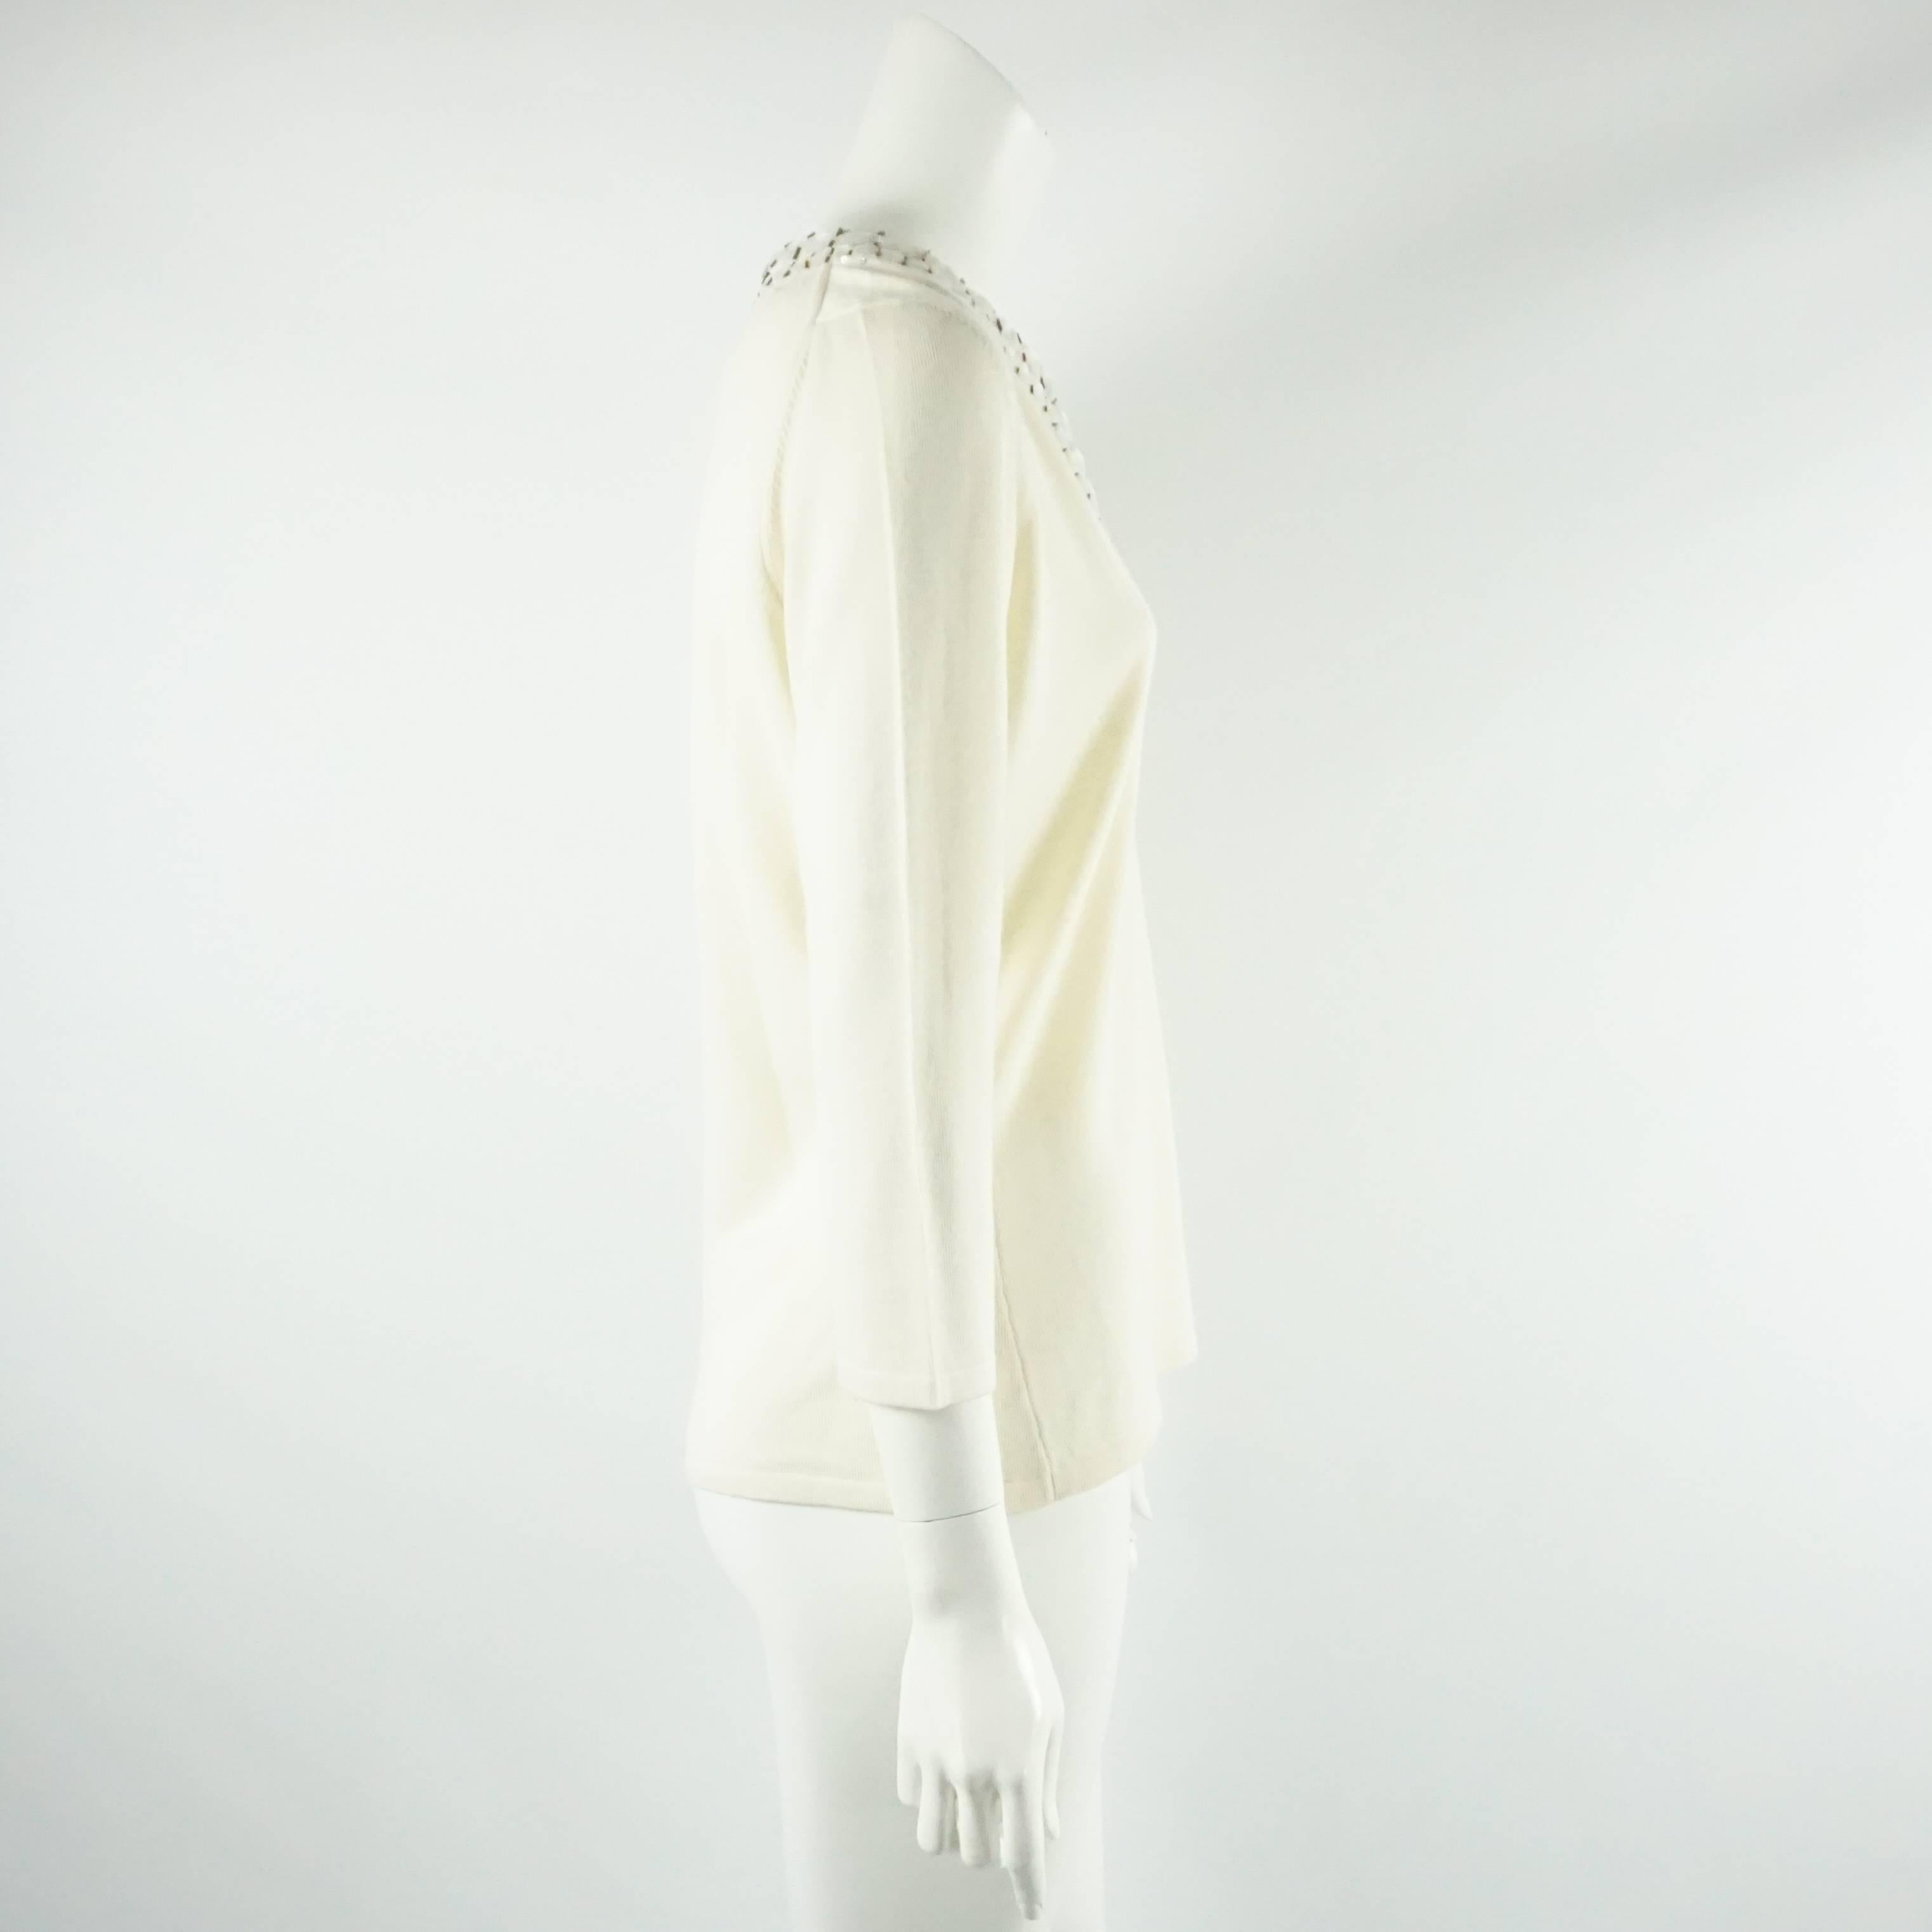 This Oscar de la Renta cashmere and silk blend sweater is ivory with stones, beads detailing around the neckline. It has a v-shape neckline and closures to close the neckline. This sweater is in excellent condition.

Measurements
Shoulder to